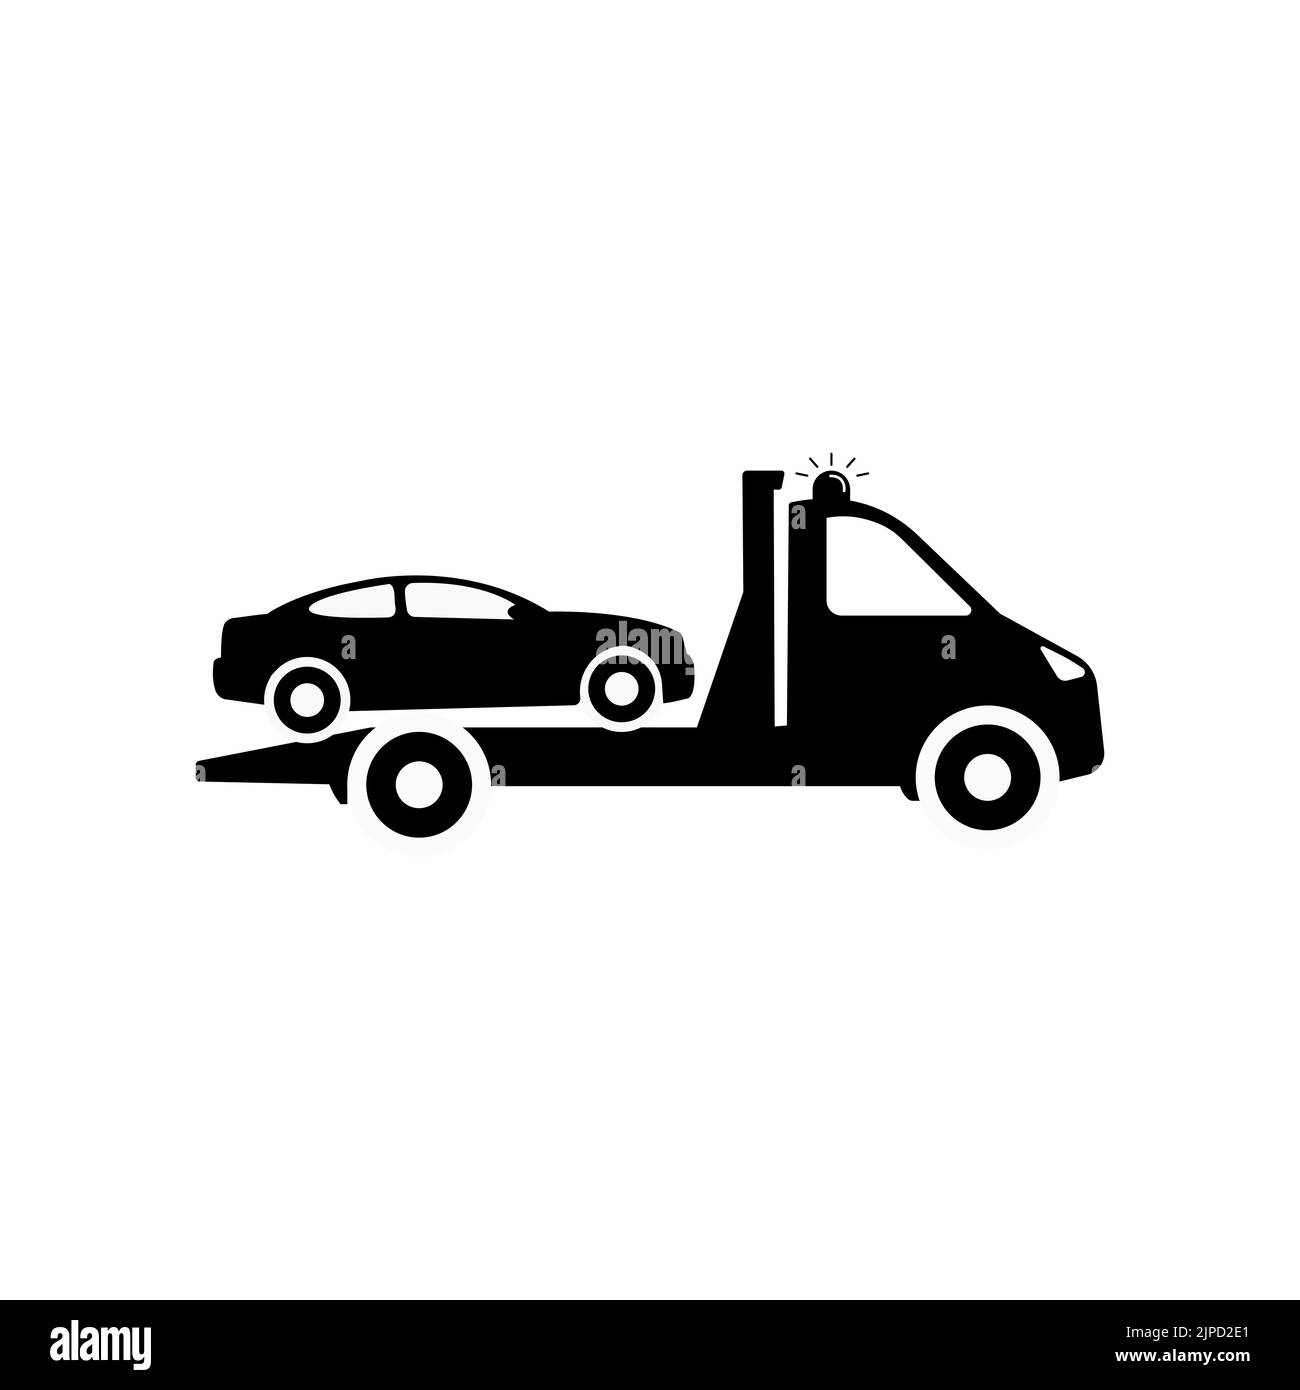 Truck car icon vector illustration logo template for many purpose. Isolated on white background. Stock Vector